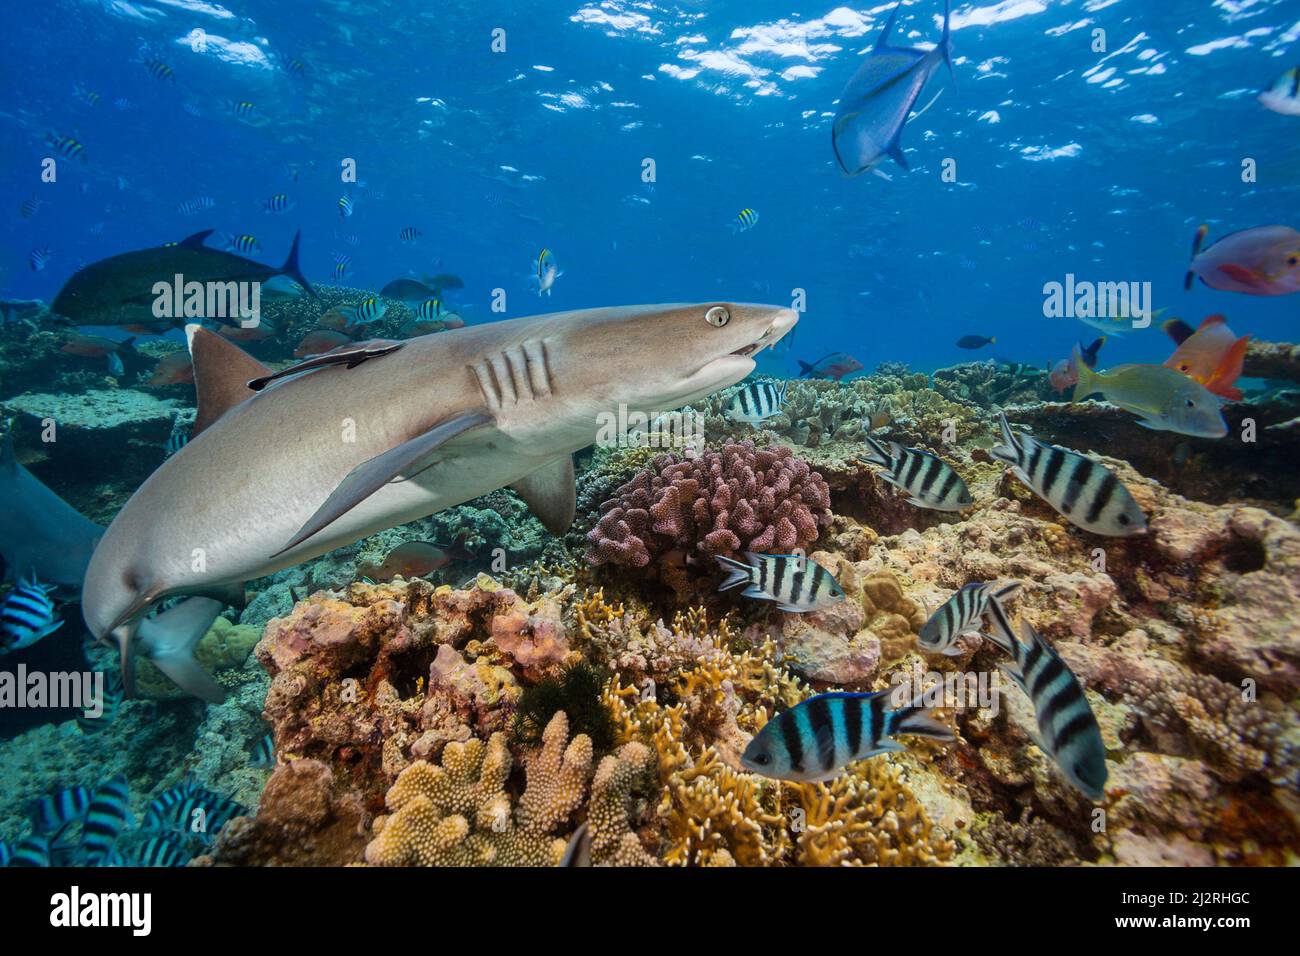 A whitetip reef shark, Triaenodon obesus, along with a many reef fish patrol the edge of the shallows in Bequ Lagoon, Viti Levu, Fiji. This is what a Stock Photo